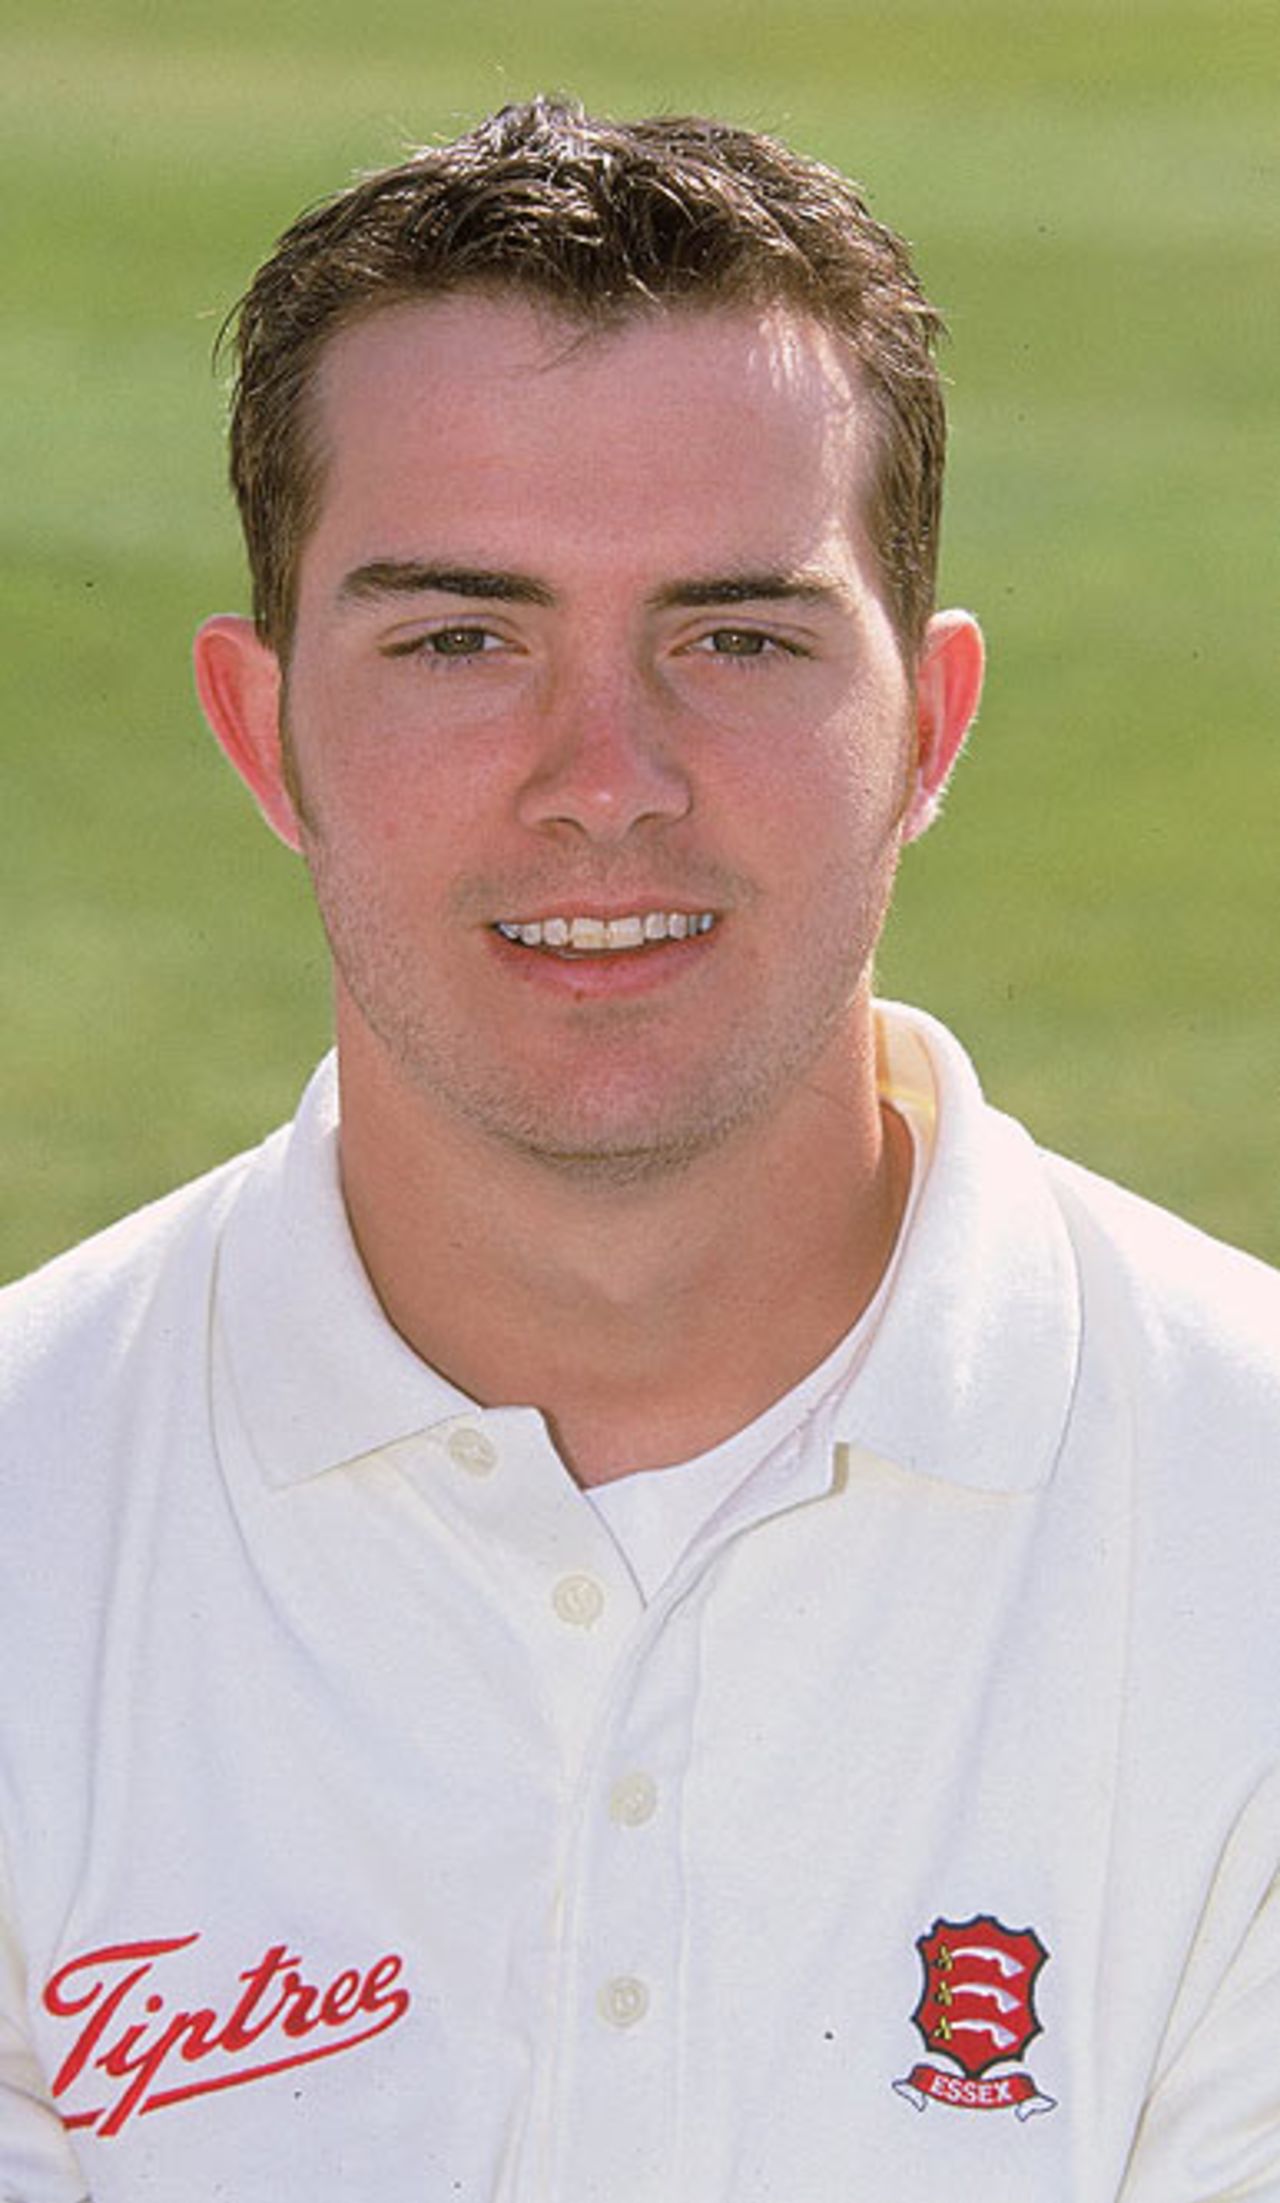 10 Apr 2000: Portrait of Stephen Peters taken at an Essex County Cricket Club photocall in Chelmsford, England.